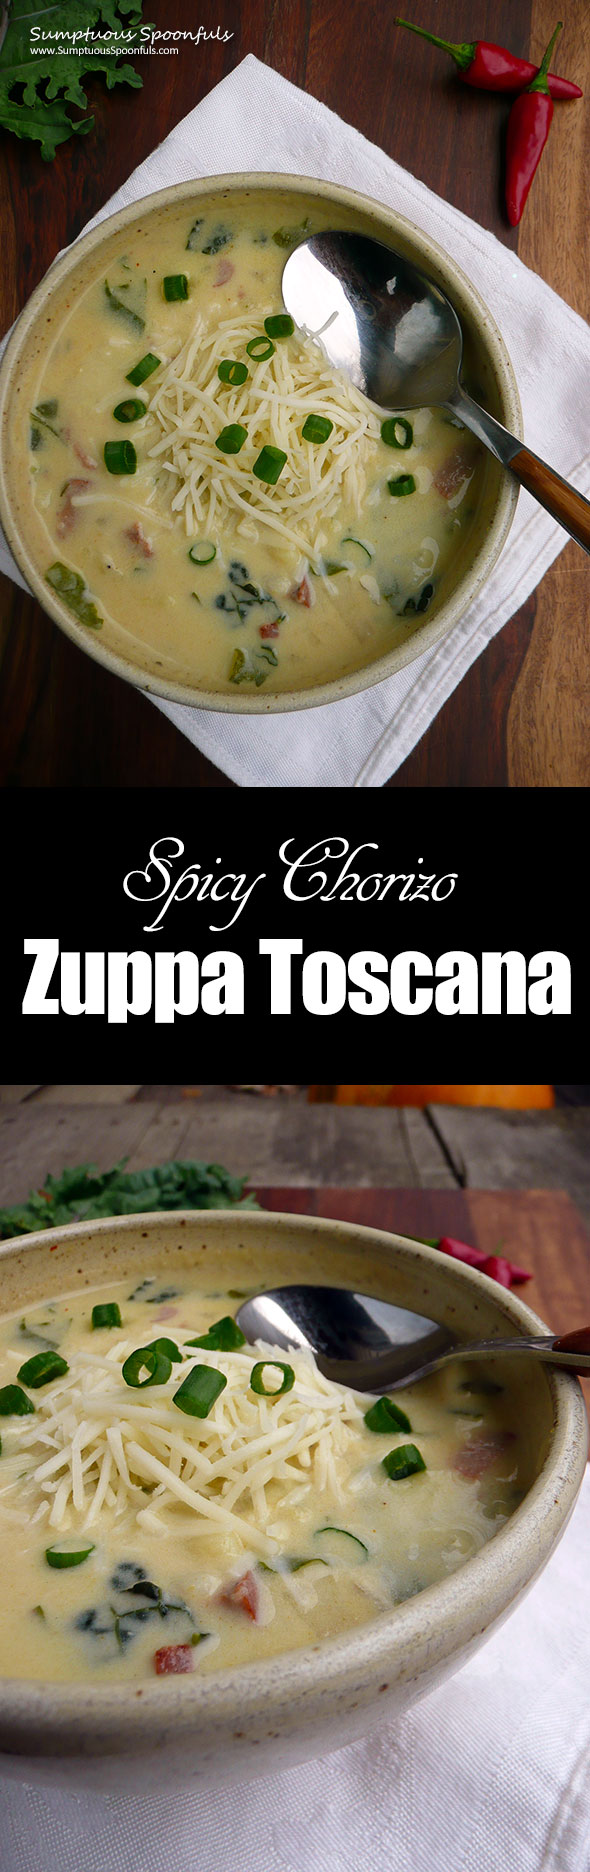 Spicy Chorizo Zuppa Toscana ~ Sumptuous Spoonfuls #sausage #kale #soup #recipe